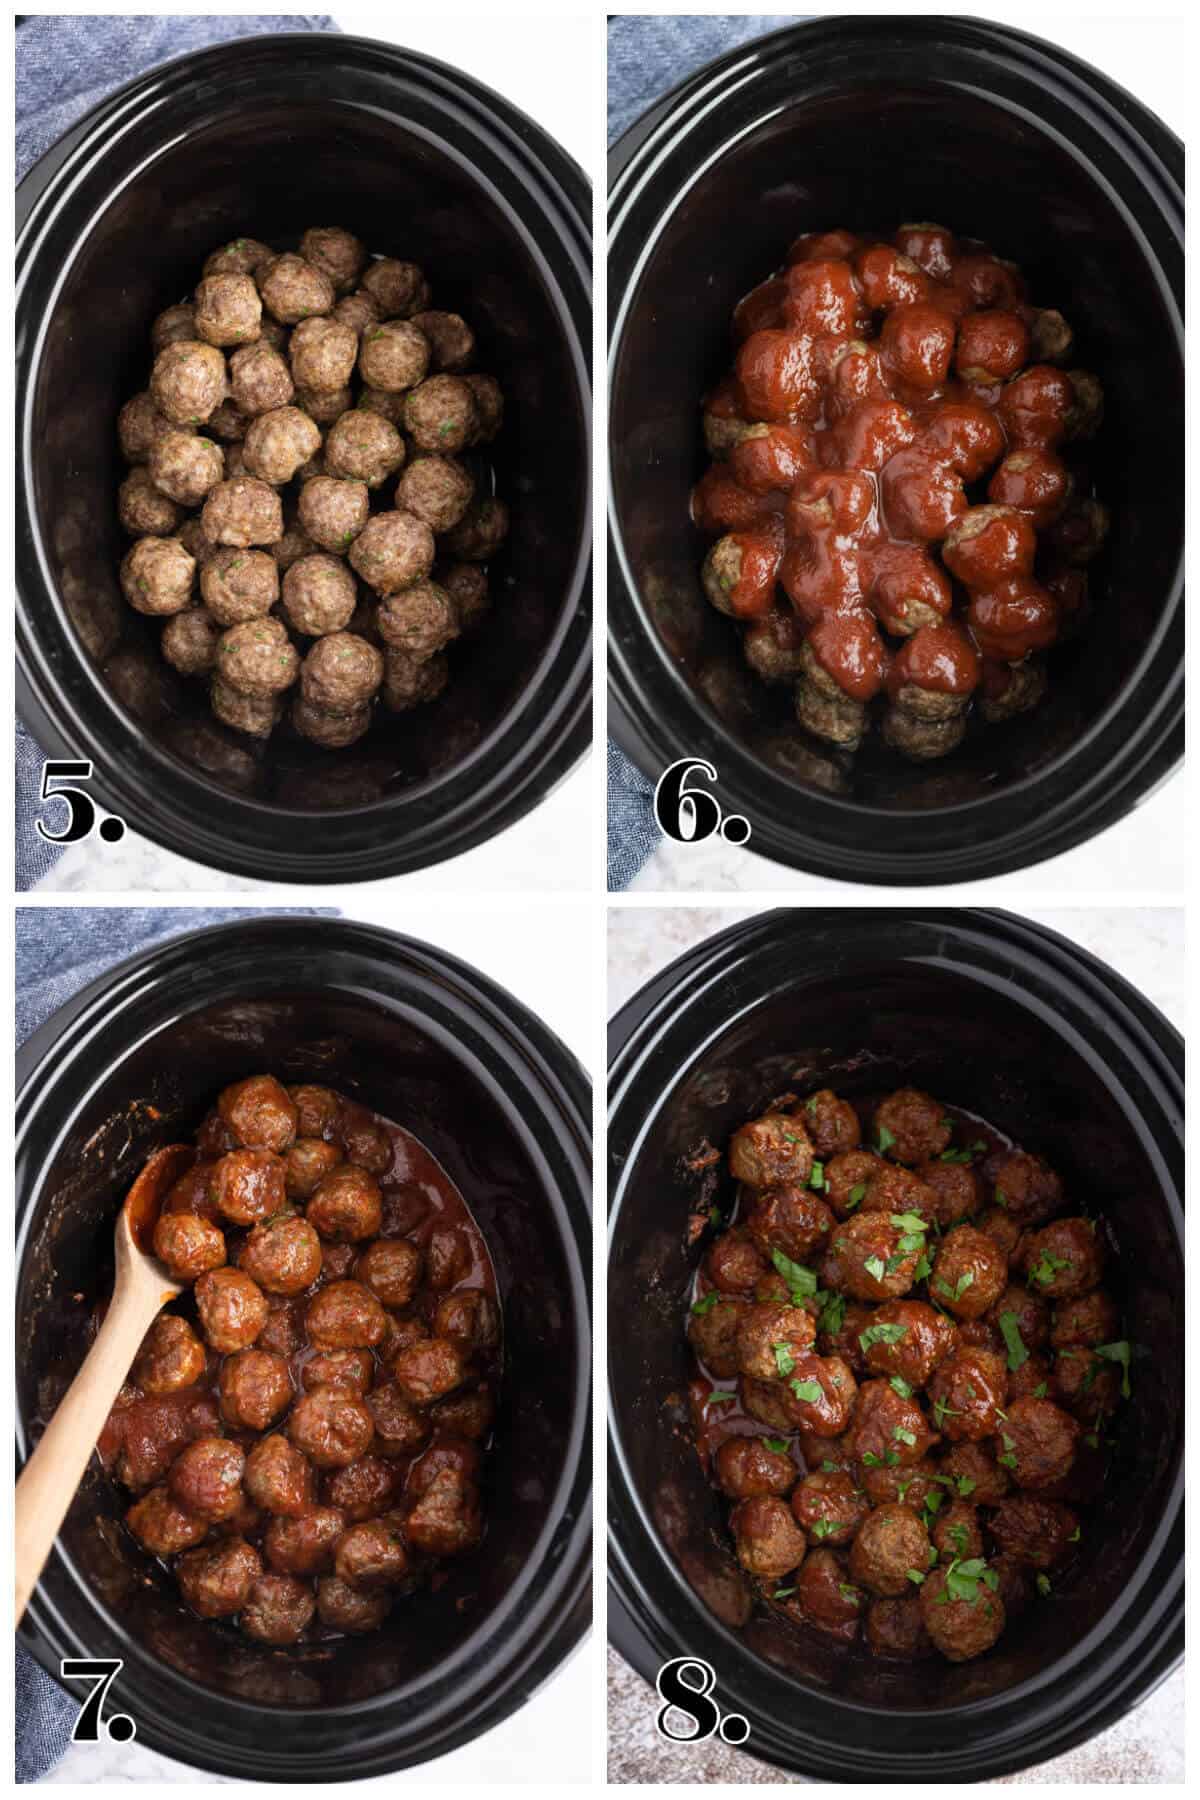 Four image collage showing how to make BBQ meatballs in a Crockpot.